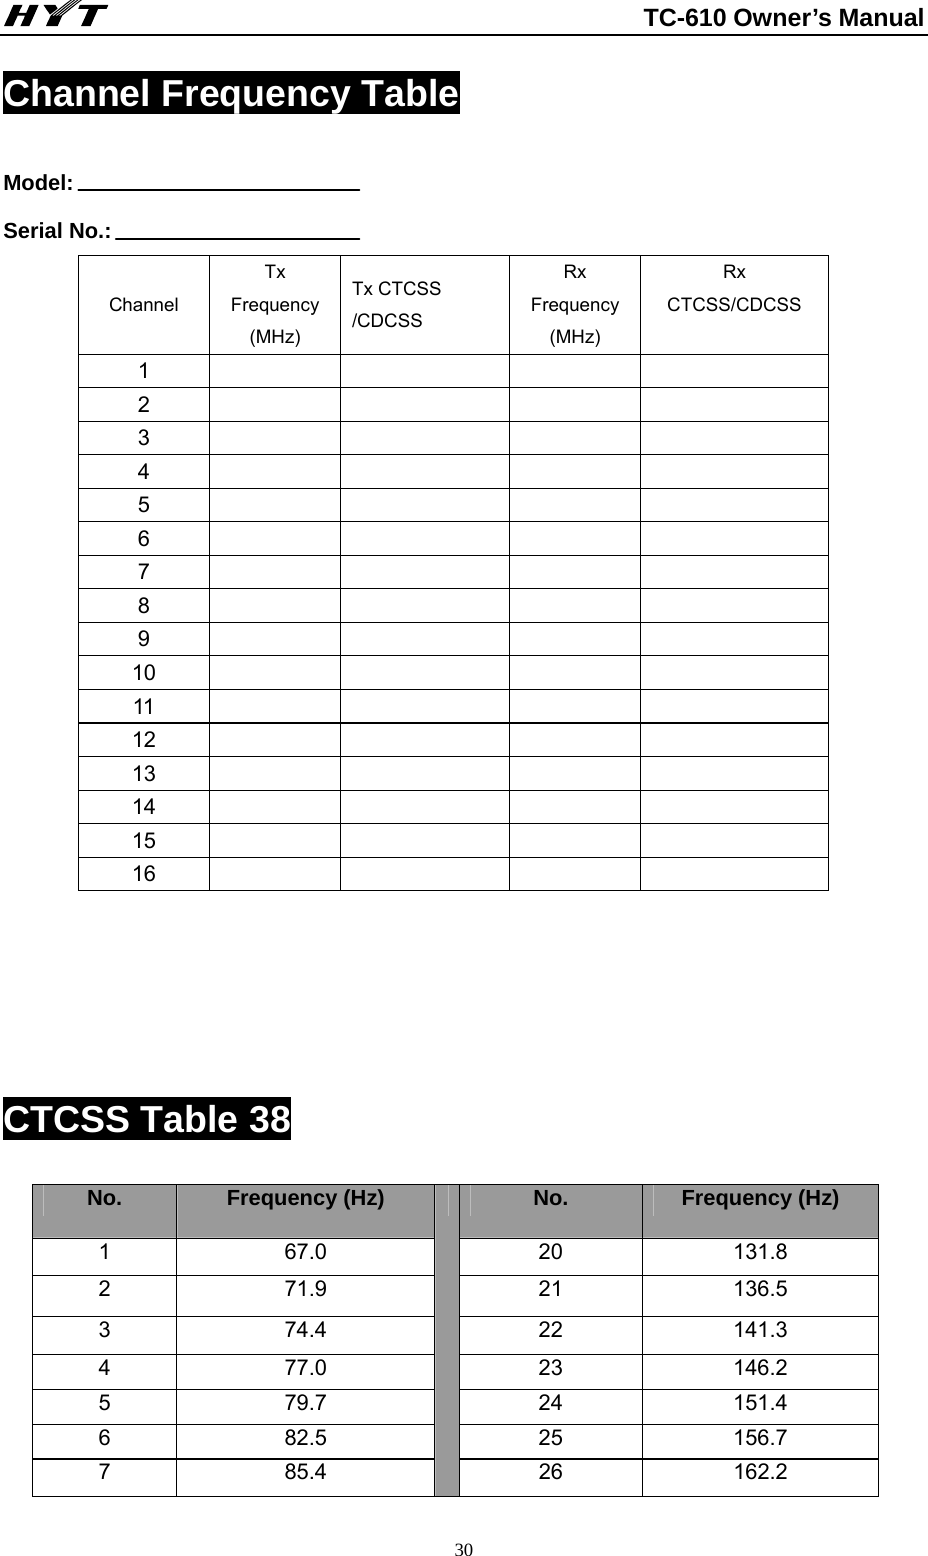                                                          TC-610 Owner’s Manual  30Channel Frequency Table Model: Serial No.: Channel Tx Frequency (MHz) Tx CTCSS /CDCSS Rx Frequency (MHz) Rx  CTCSS/CDCSS 1      2      3      4      5      6      7      8      9      10      11      12      13      14      15      16        CTCSS Table 38 No.  Frequency (Hz)  No.  Frequency (Hz) 1 67.0  20 131.8 2 71.9  21 136.5 3 74.4  22 141.3 4 77.0  23 146.2 5 79.7  24 151.4 6 82.5  25 156.7 7 85.4  26 162.2 